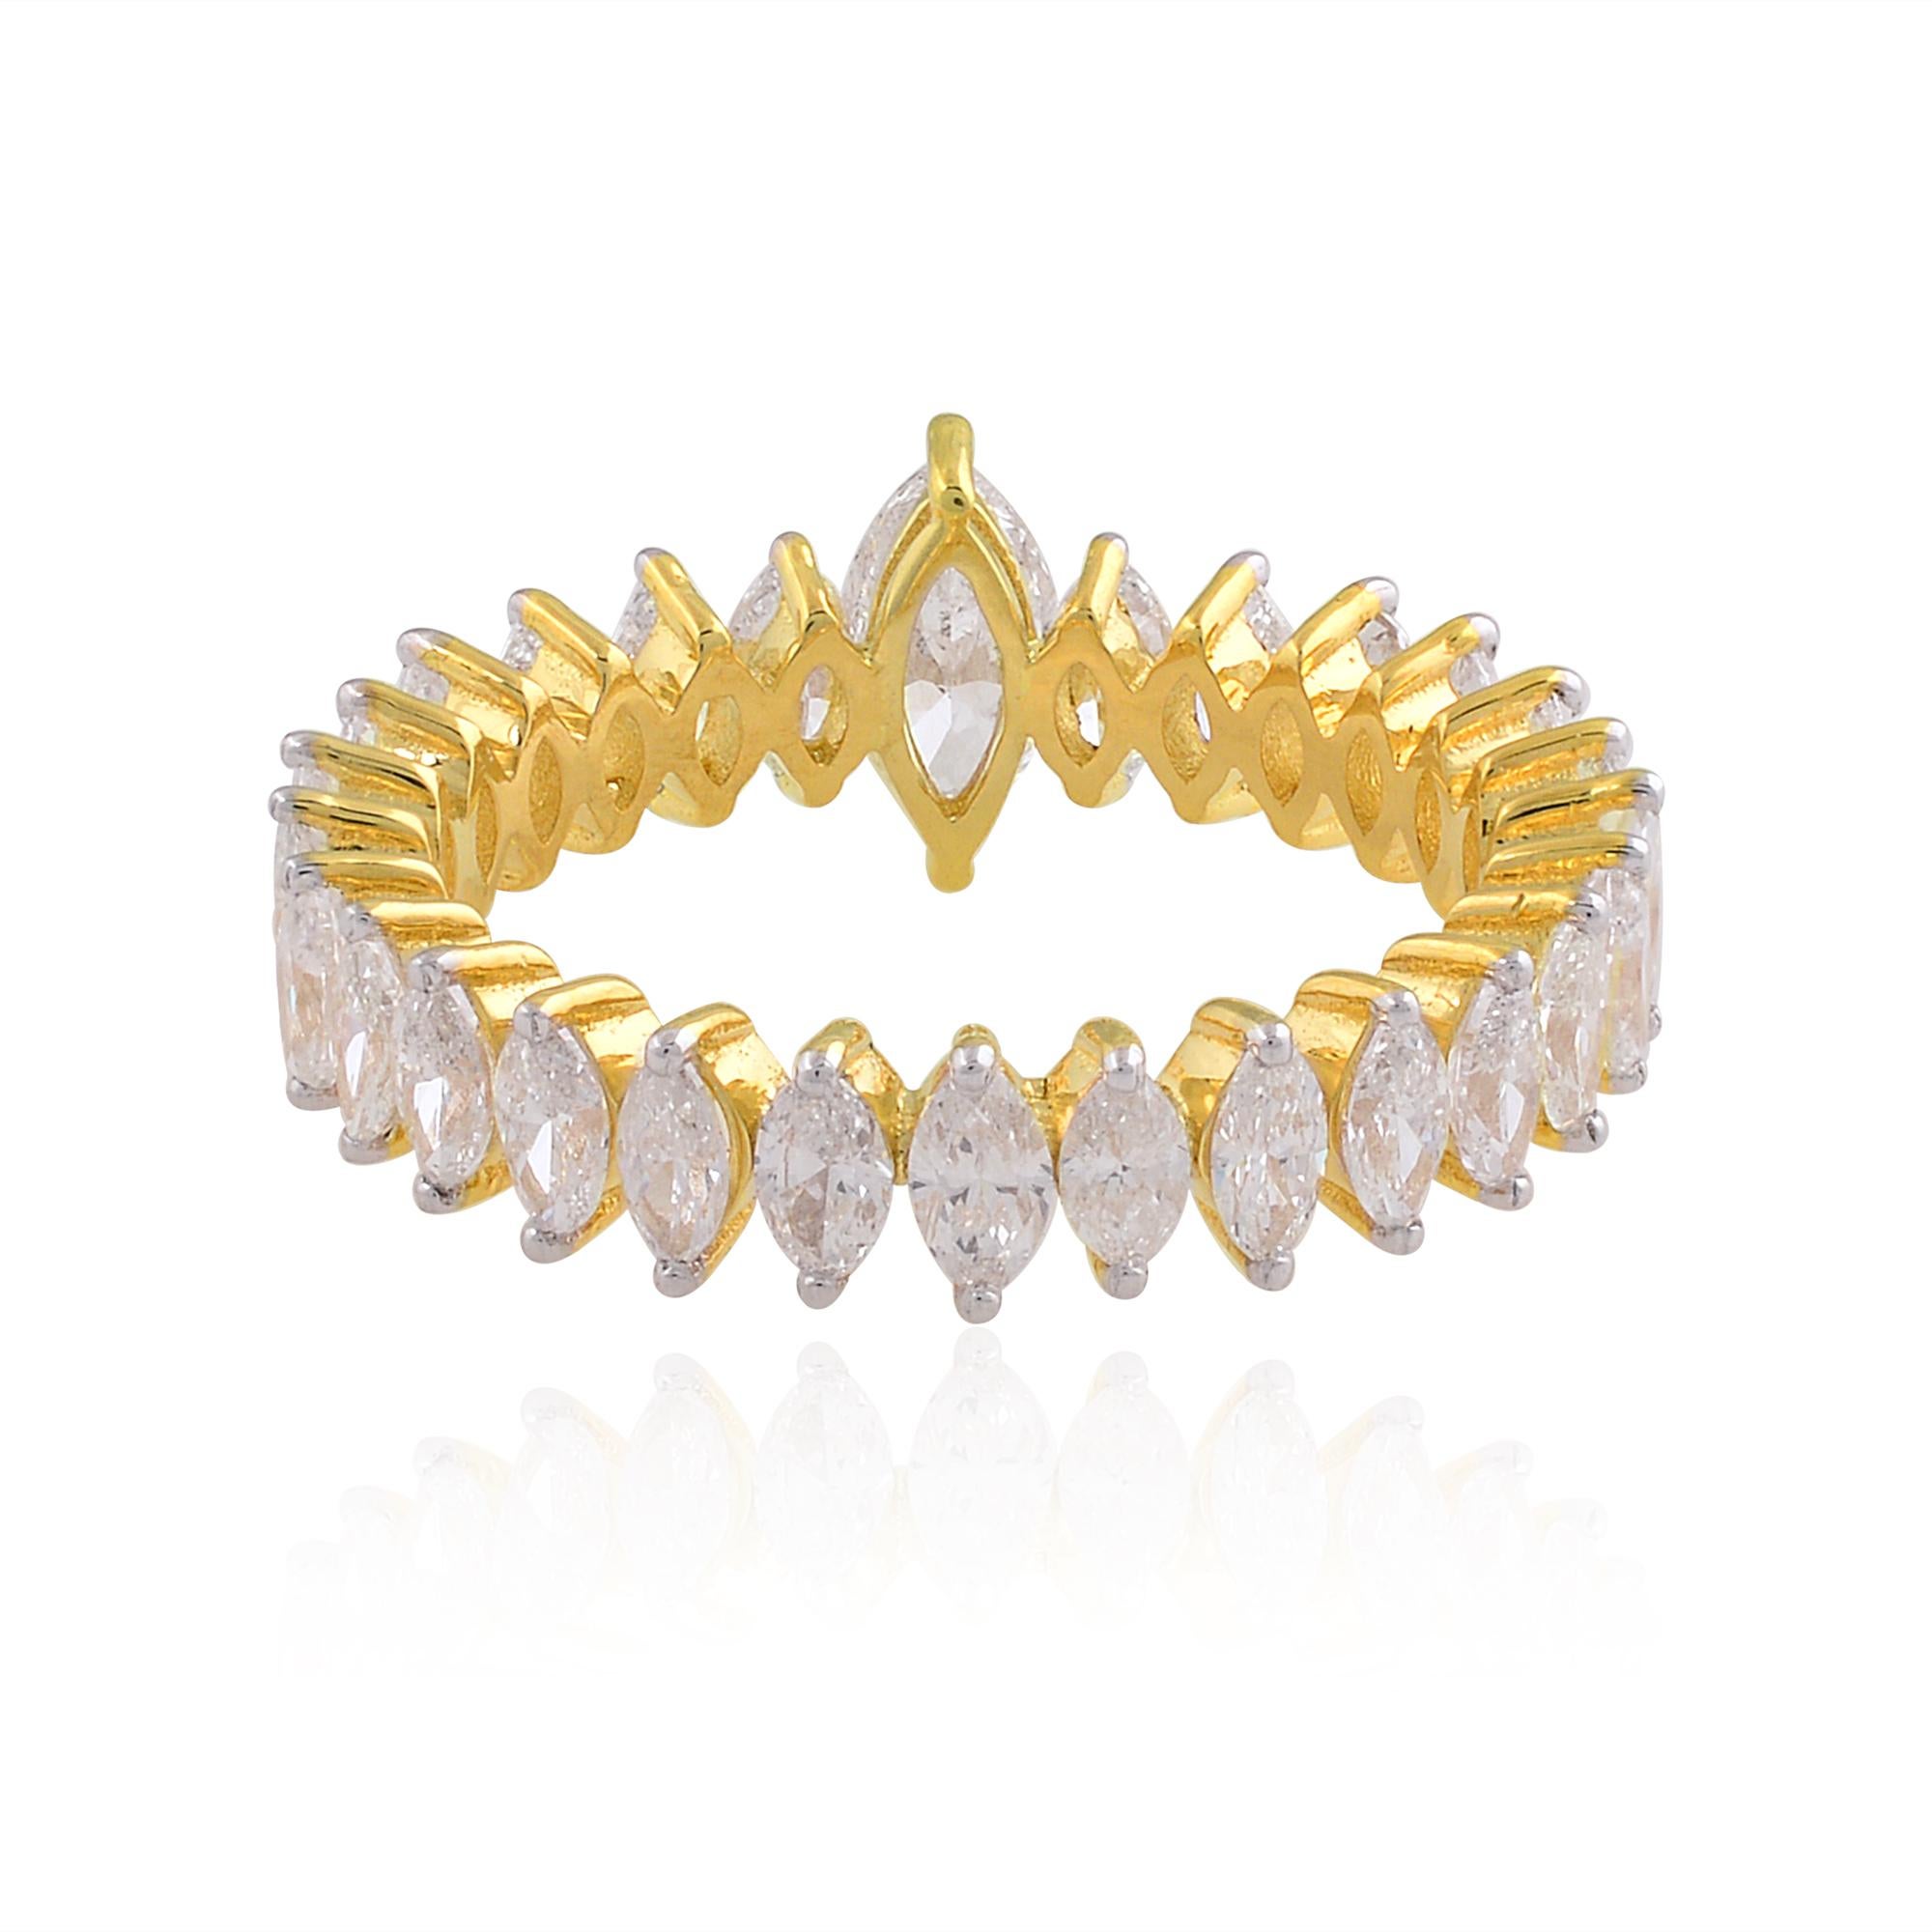 For Sale:  2.60 Carat Marquise Diamond Band Ring Solid 18k Yellow Gold Handmade Jewelry 3